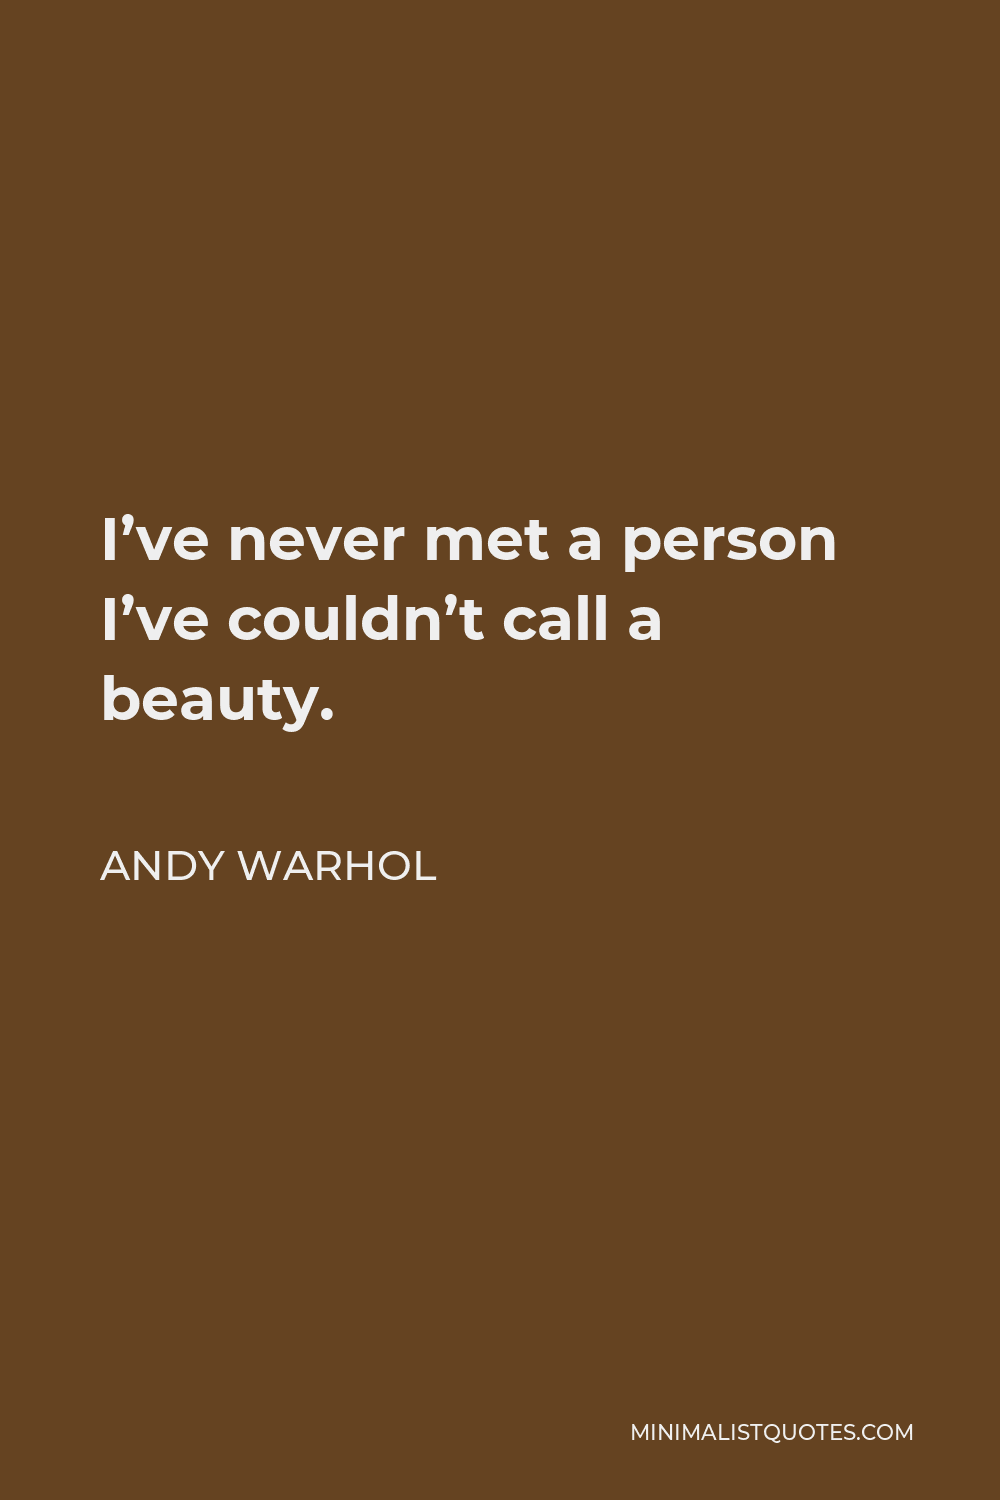 Andy Warhol Quote - I’ve never met a person I’ve couldn’t call a beauty.